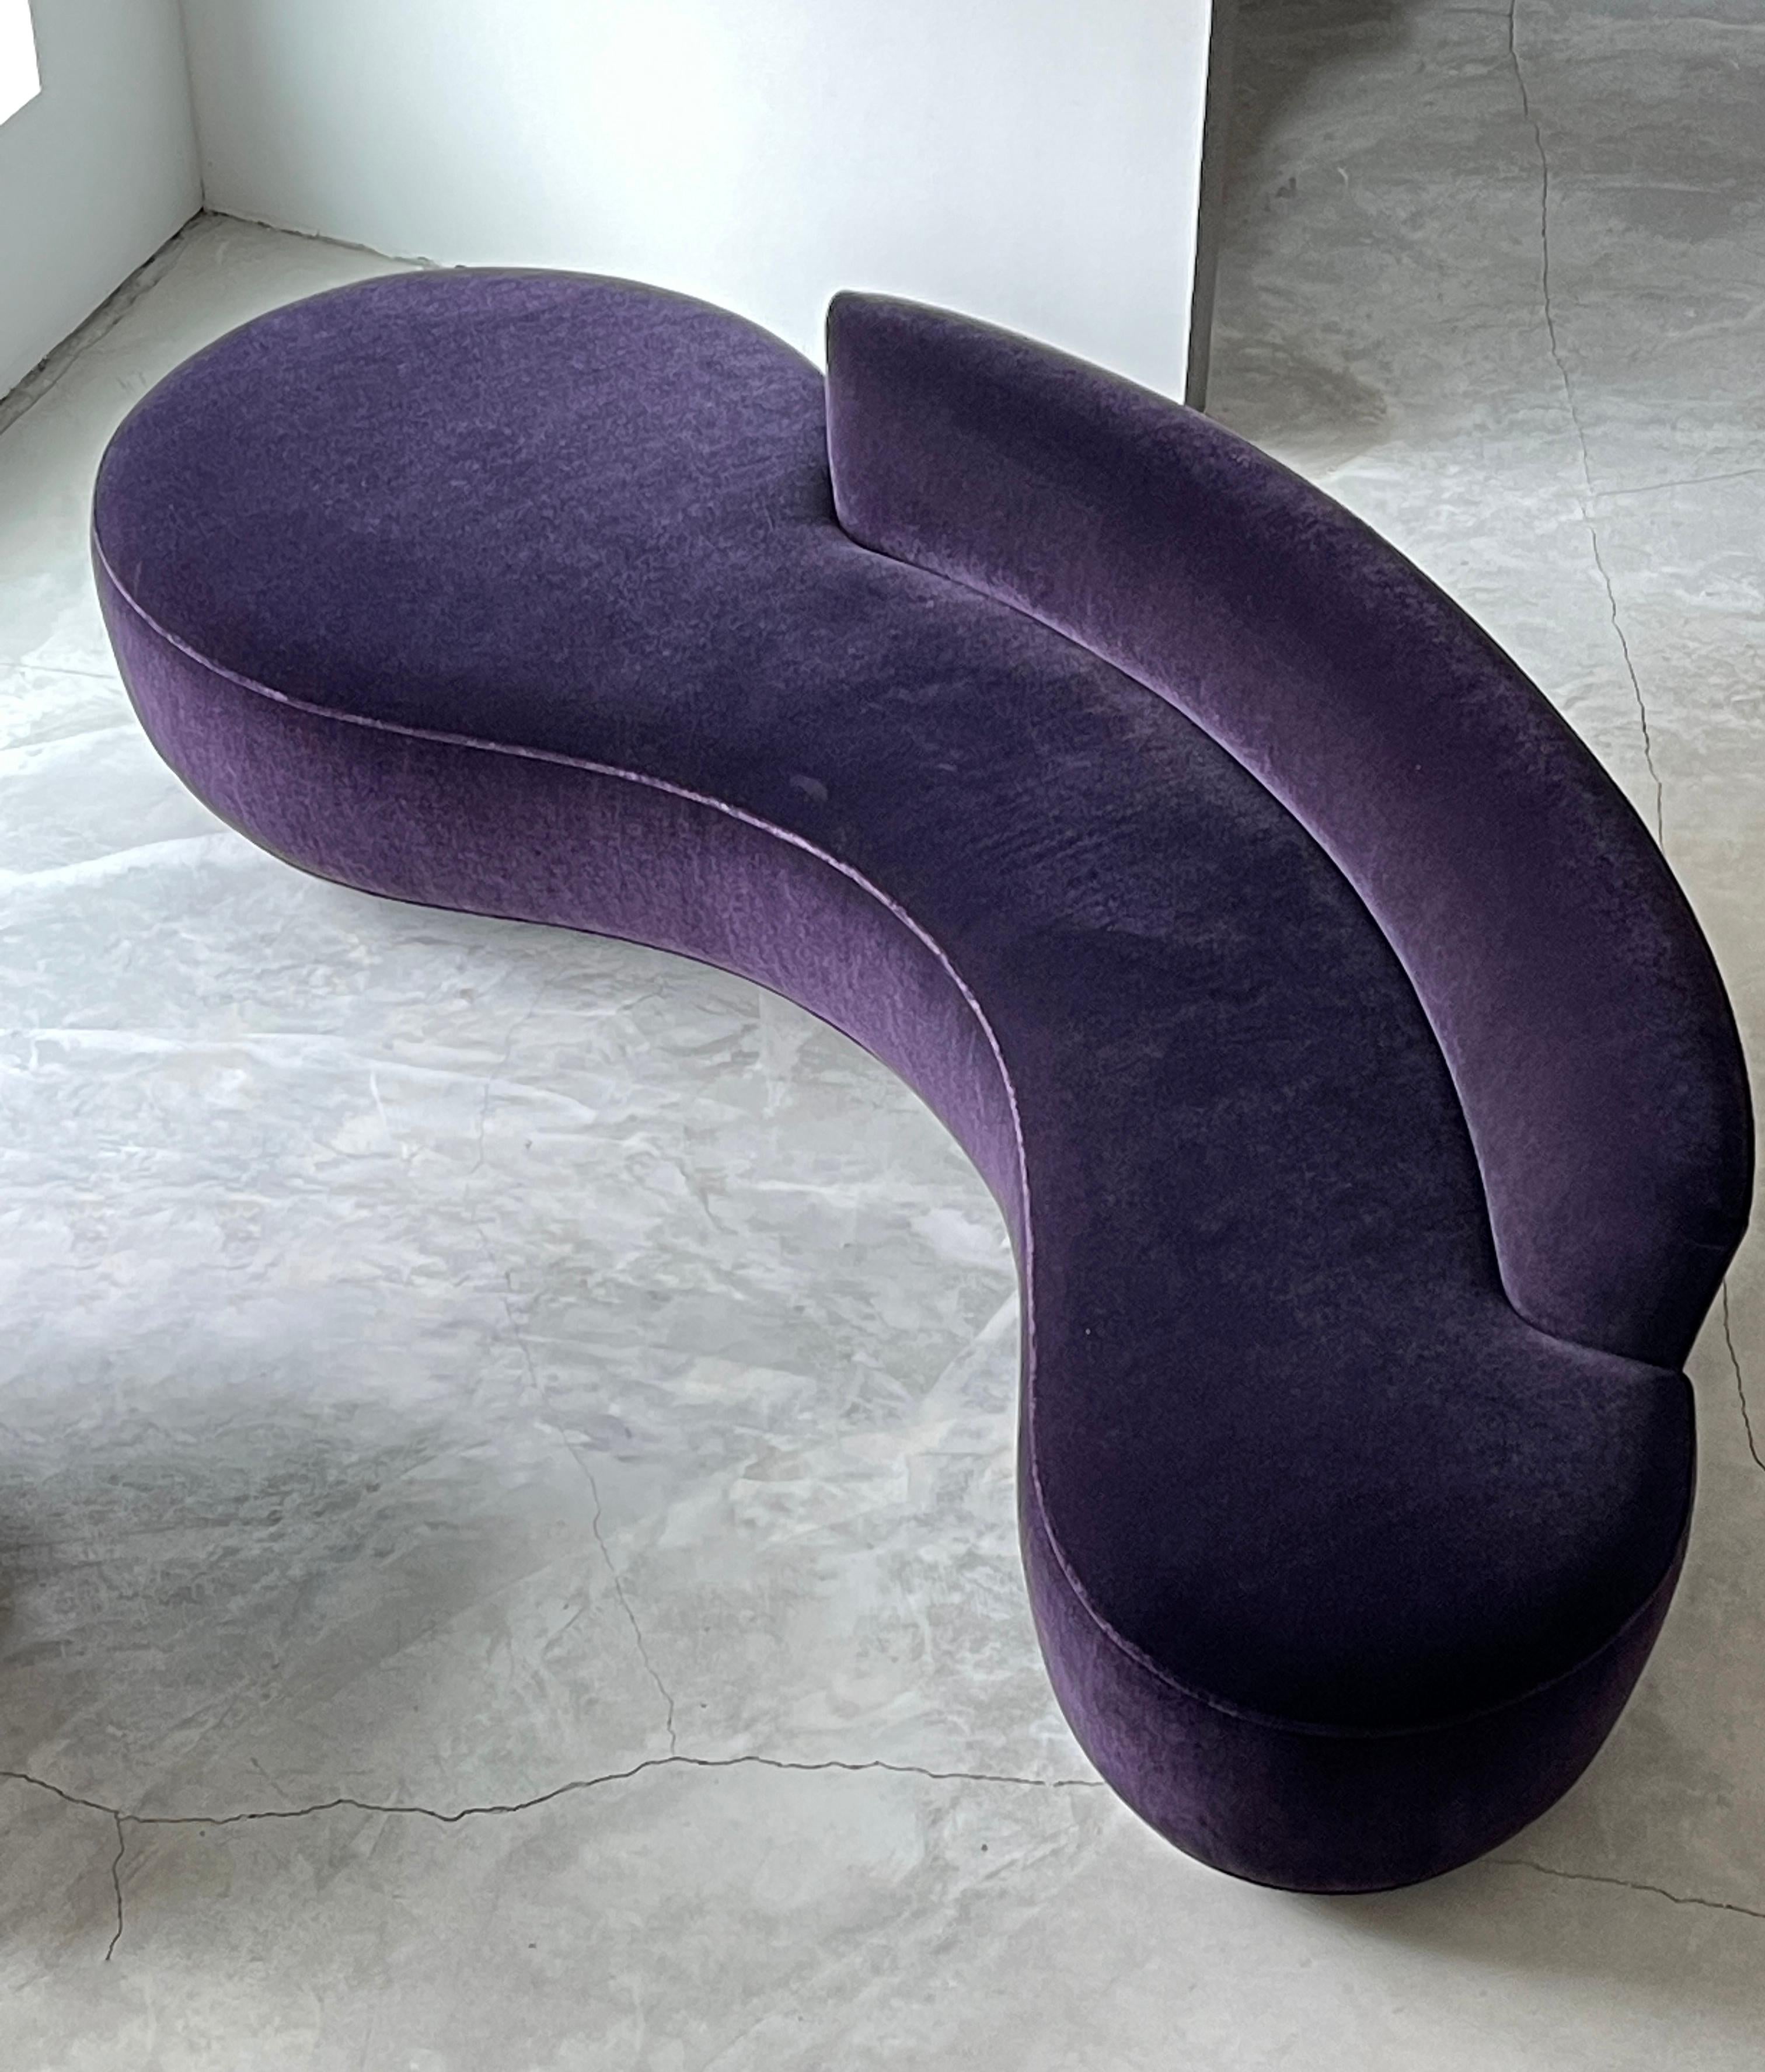 A hyper-modern and organic sofa designed by Vladimir Kagan. Produced by Vladimir Kagan Designs, Inc. c. 1970s. Executed in wood and reupholstered in high-end mohair.

Other designers working in the organic style include Gio Ponti, Jean Royere,